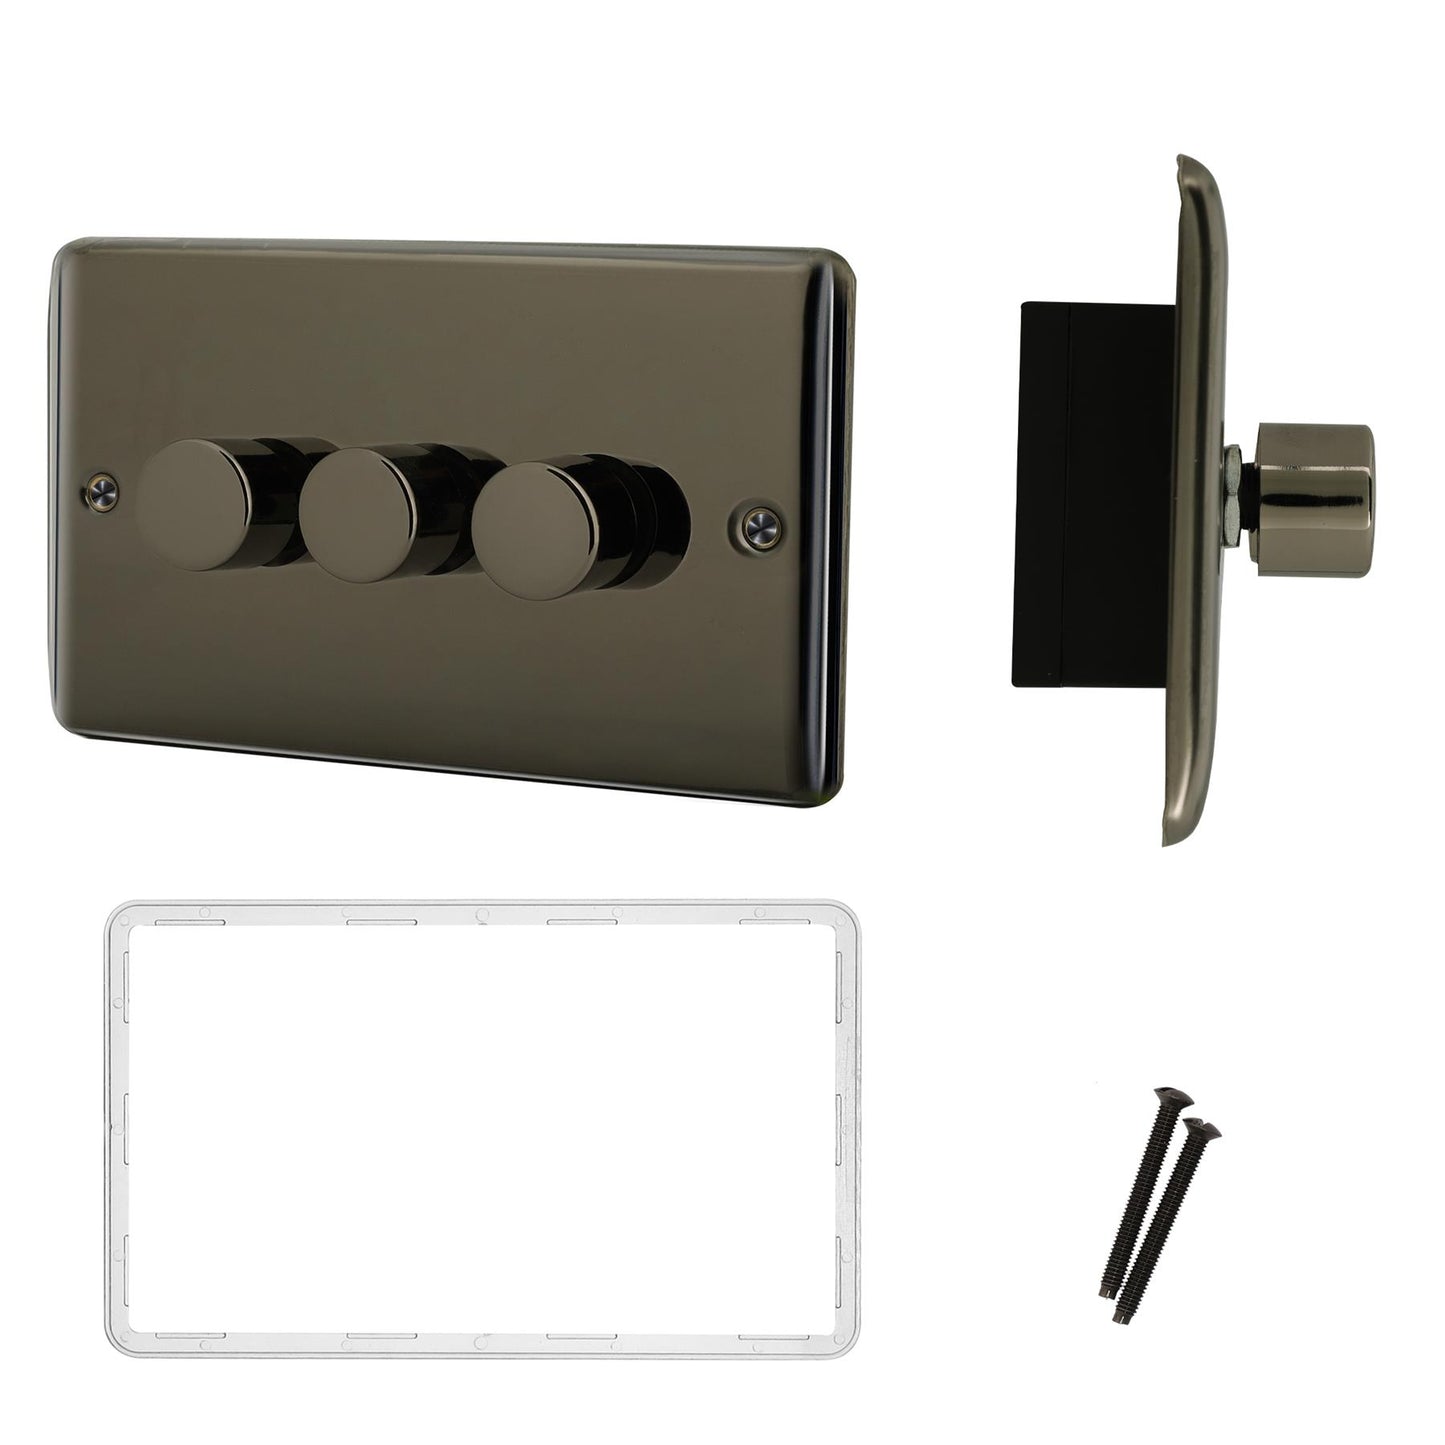 Polished Nickel Steel Light Switches USB Sockets Fuse Dimmer TV Cooker Switch